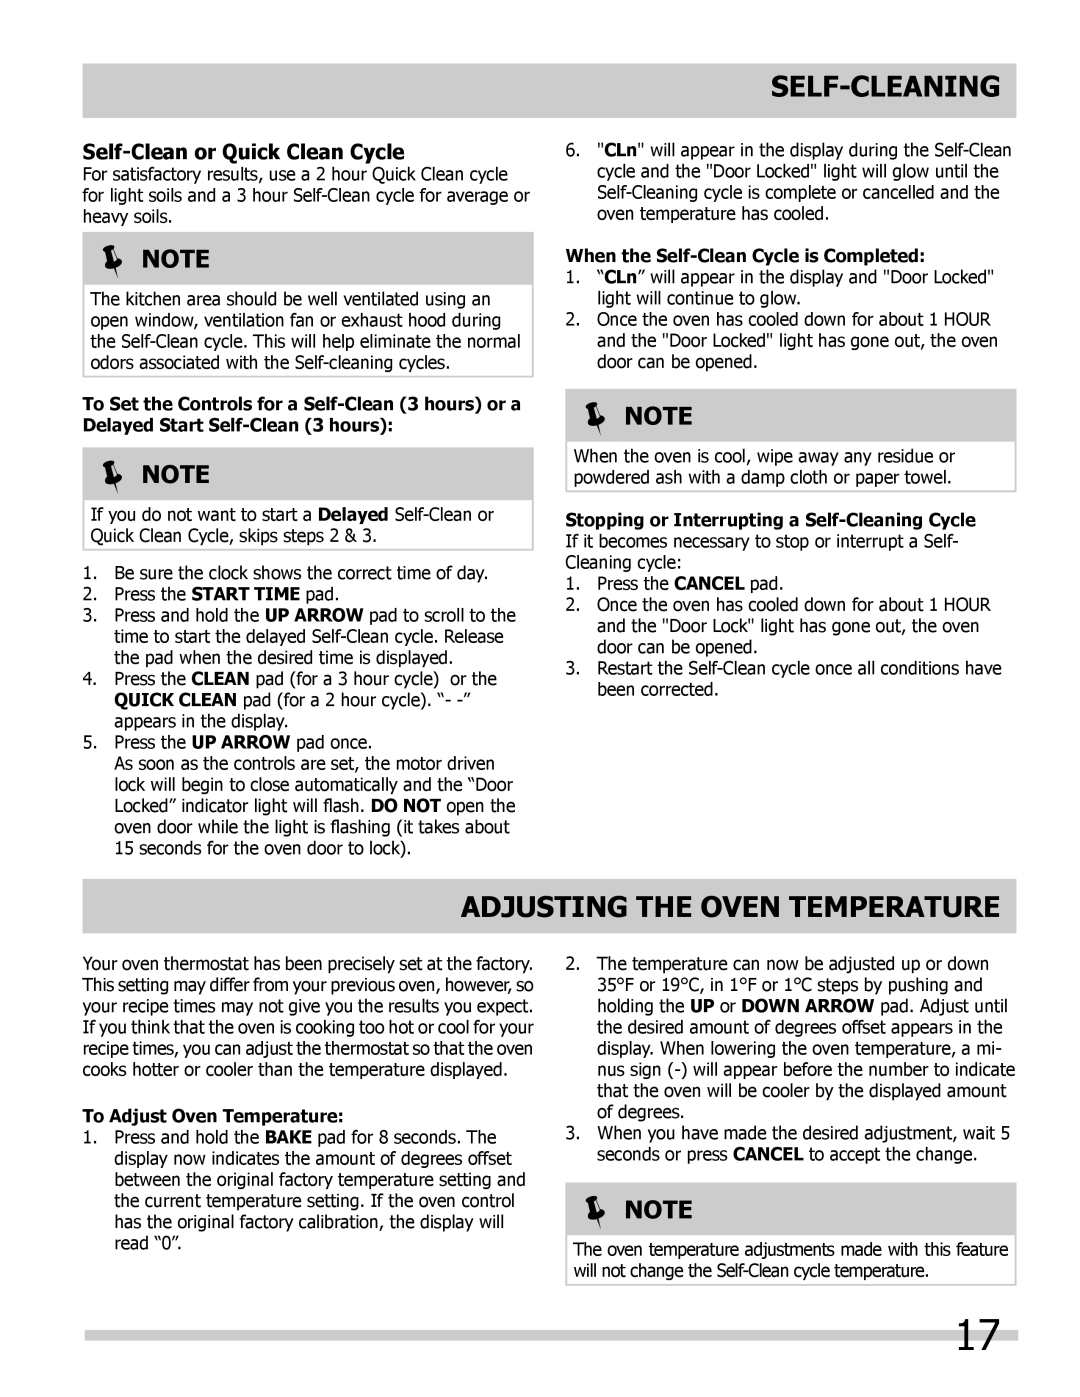 Frigidaire 318205325 Adjusting the Oven Temperature, Self-Clean or Quick Clean Cycle, To Adjust Oven Temperature,  Note 